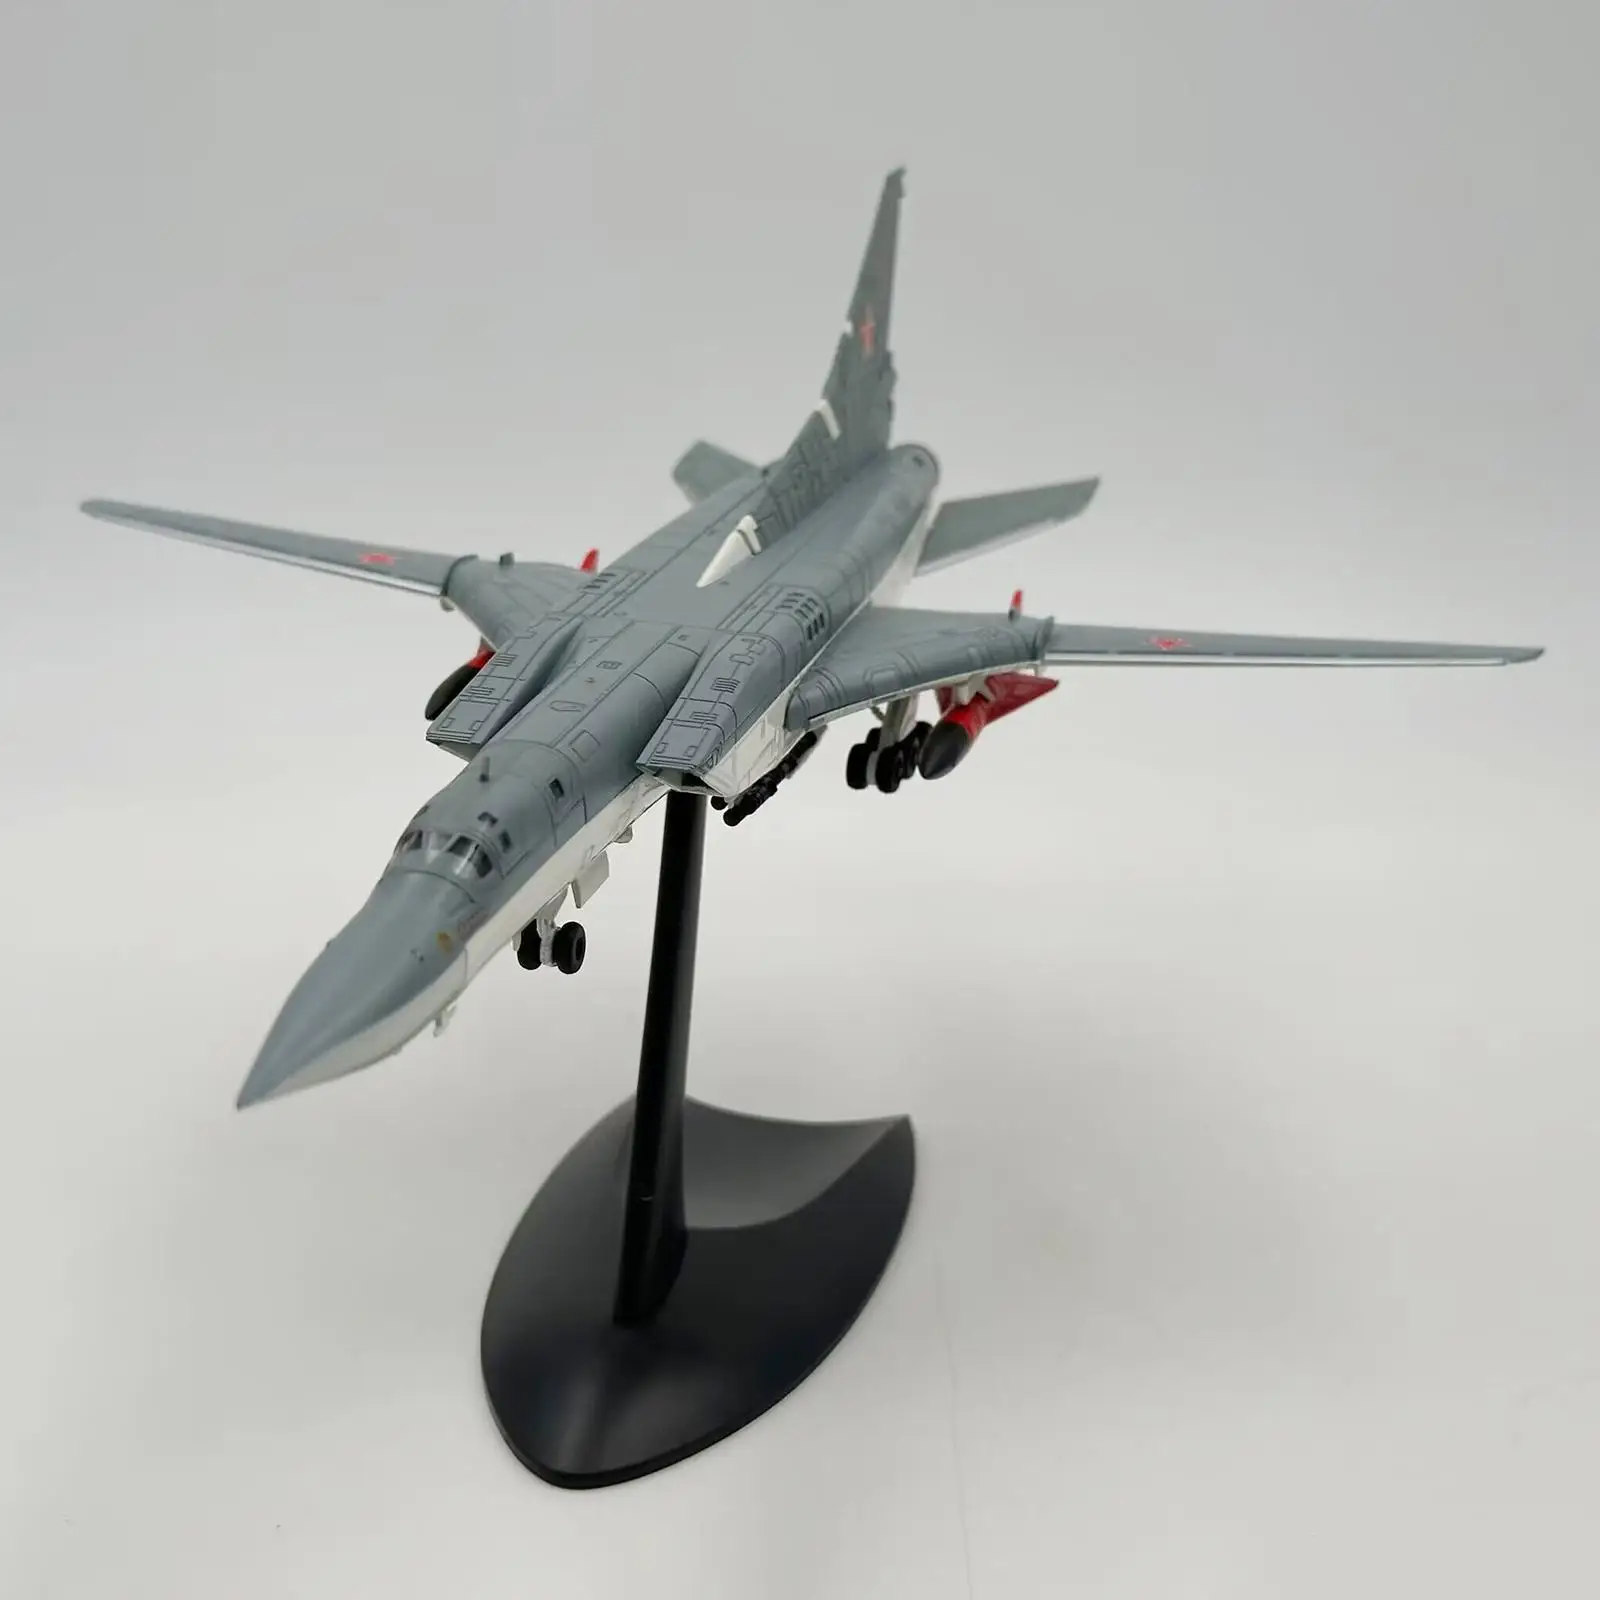 Simulation 1/144 Fighter Diecast Model Kids Adults Toy Ornament Retro Plane with Display Stand for Bedroom Office Shelf